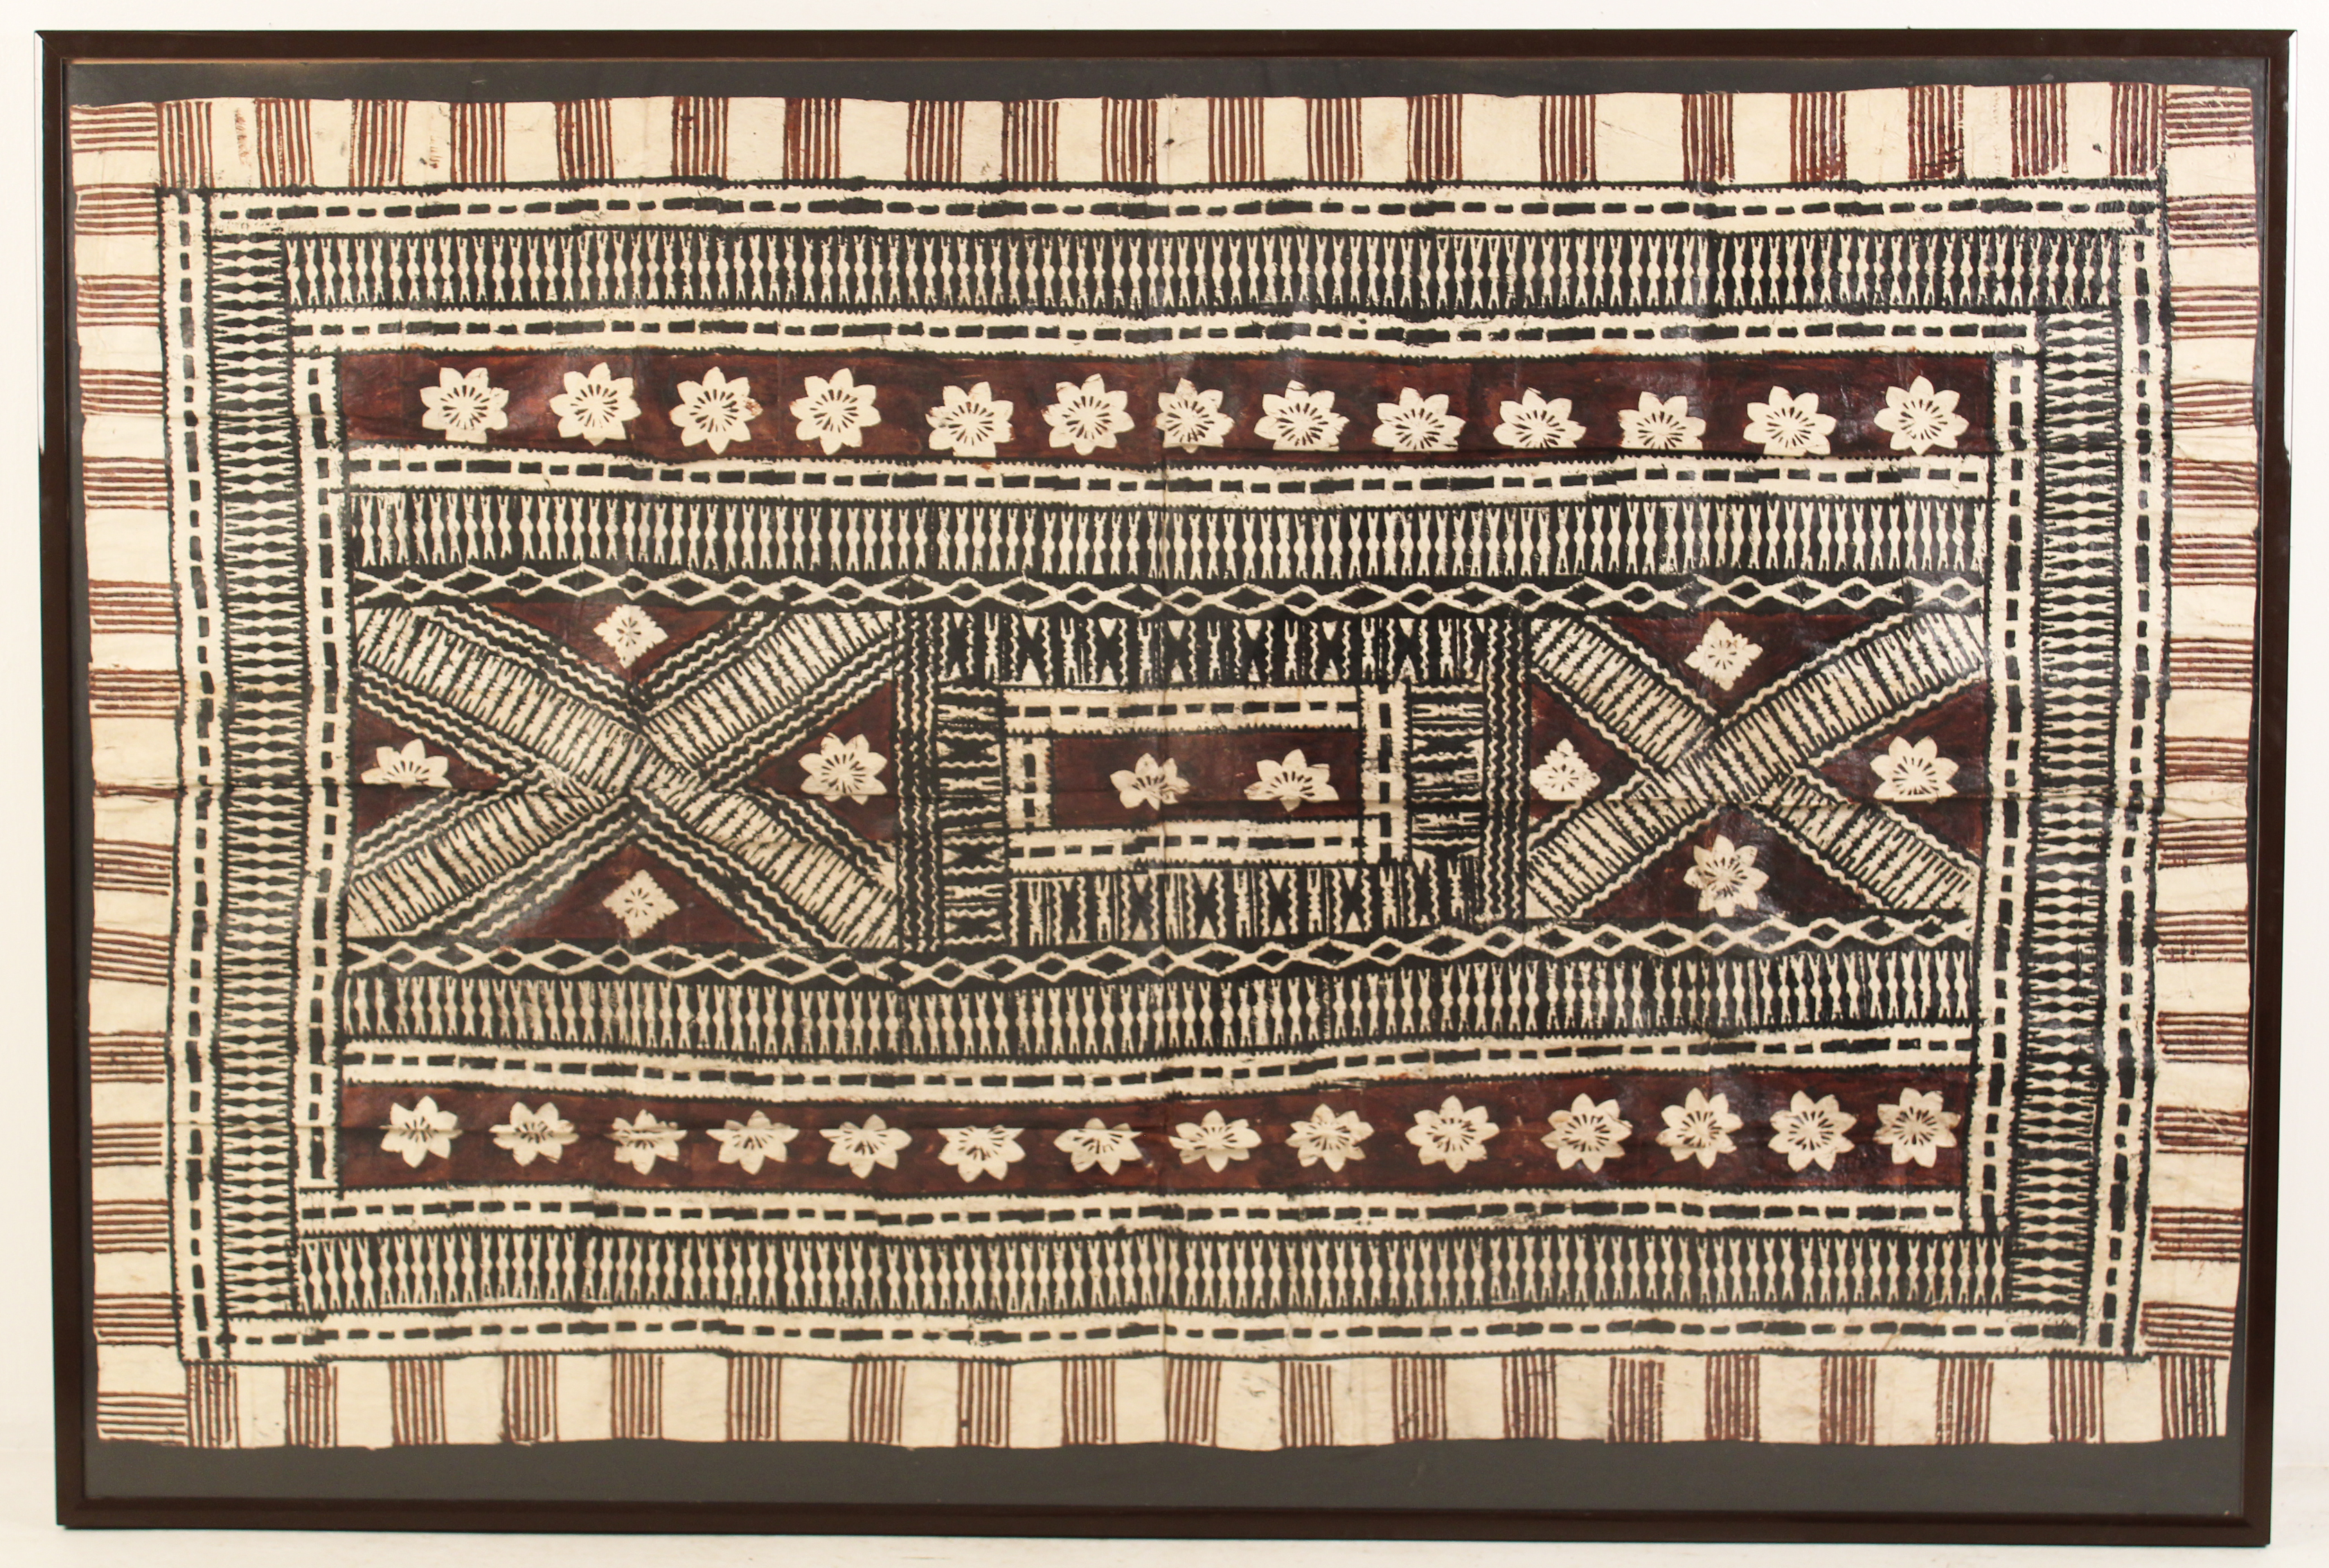 SOUTH PACIFIC BARKCLOTH TAPA FROM 35ee74